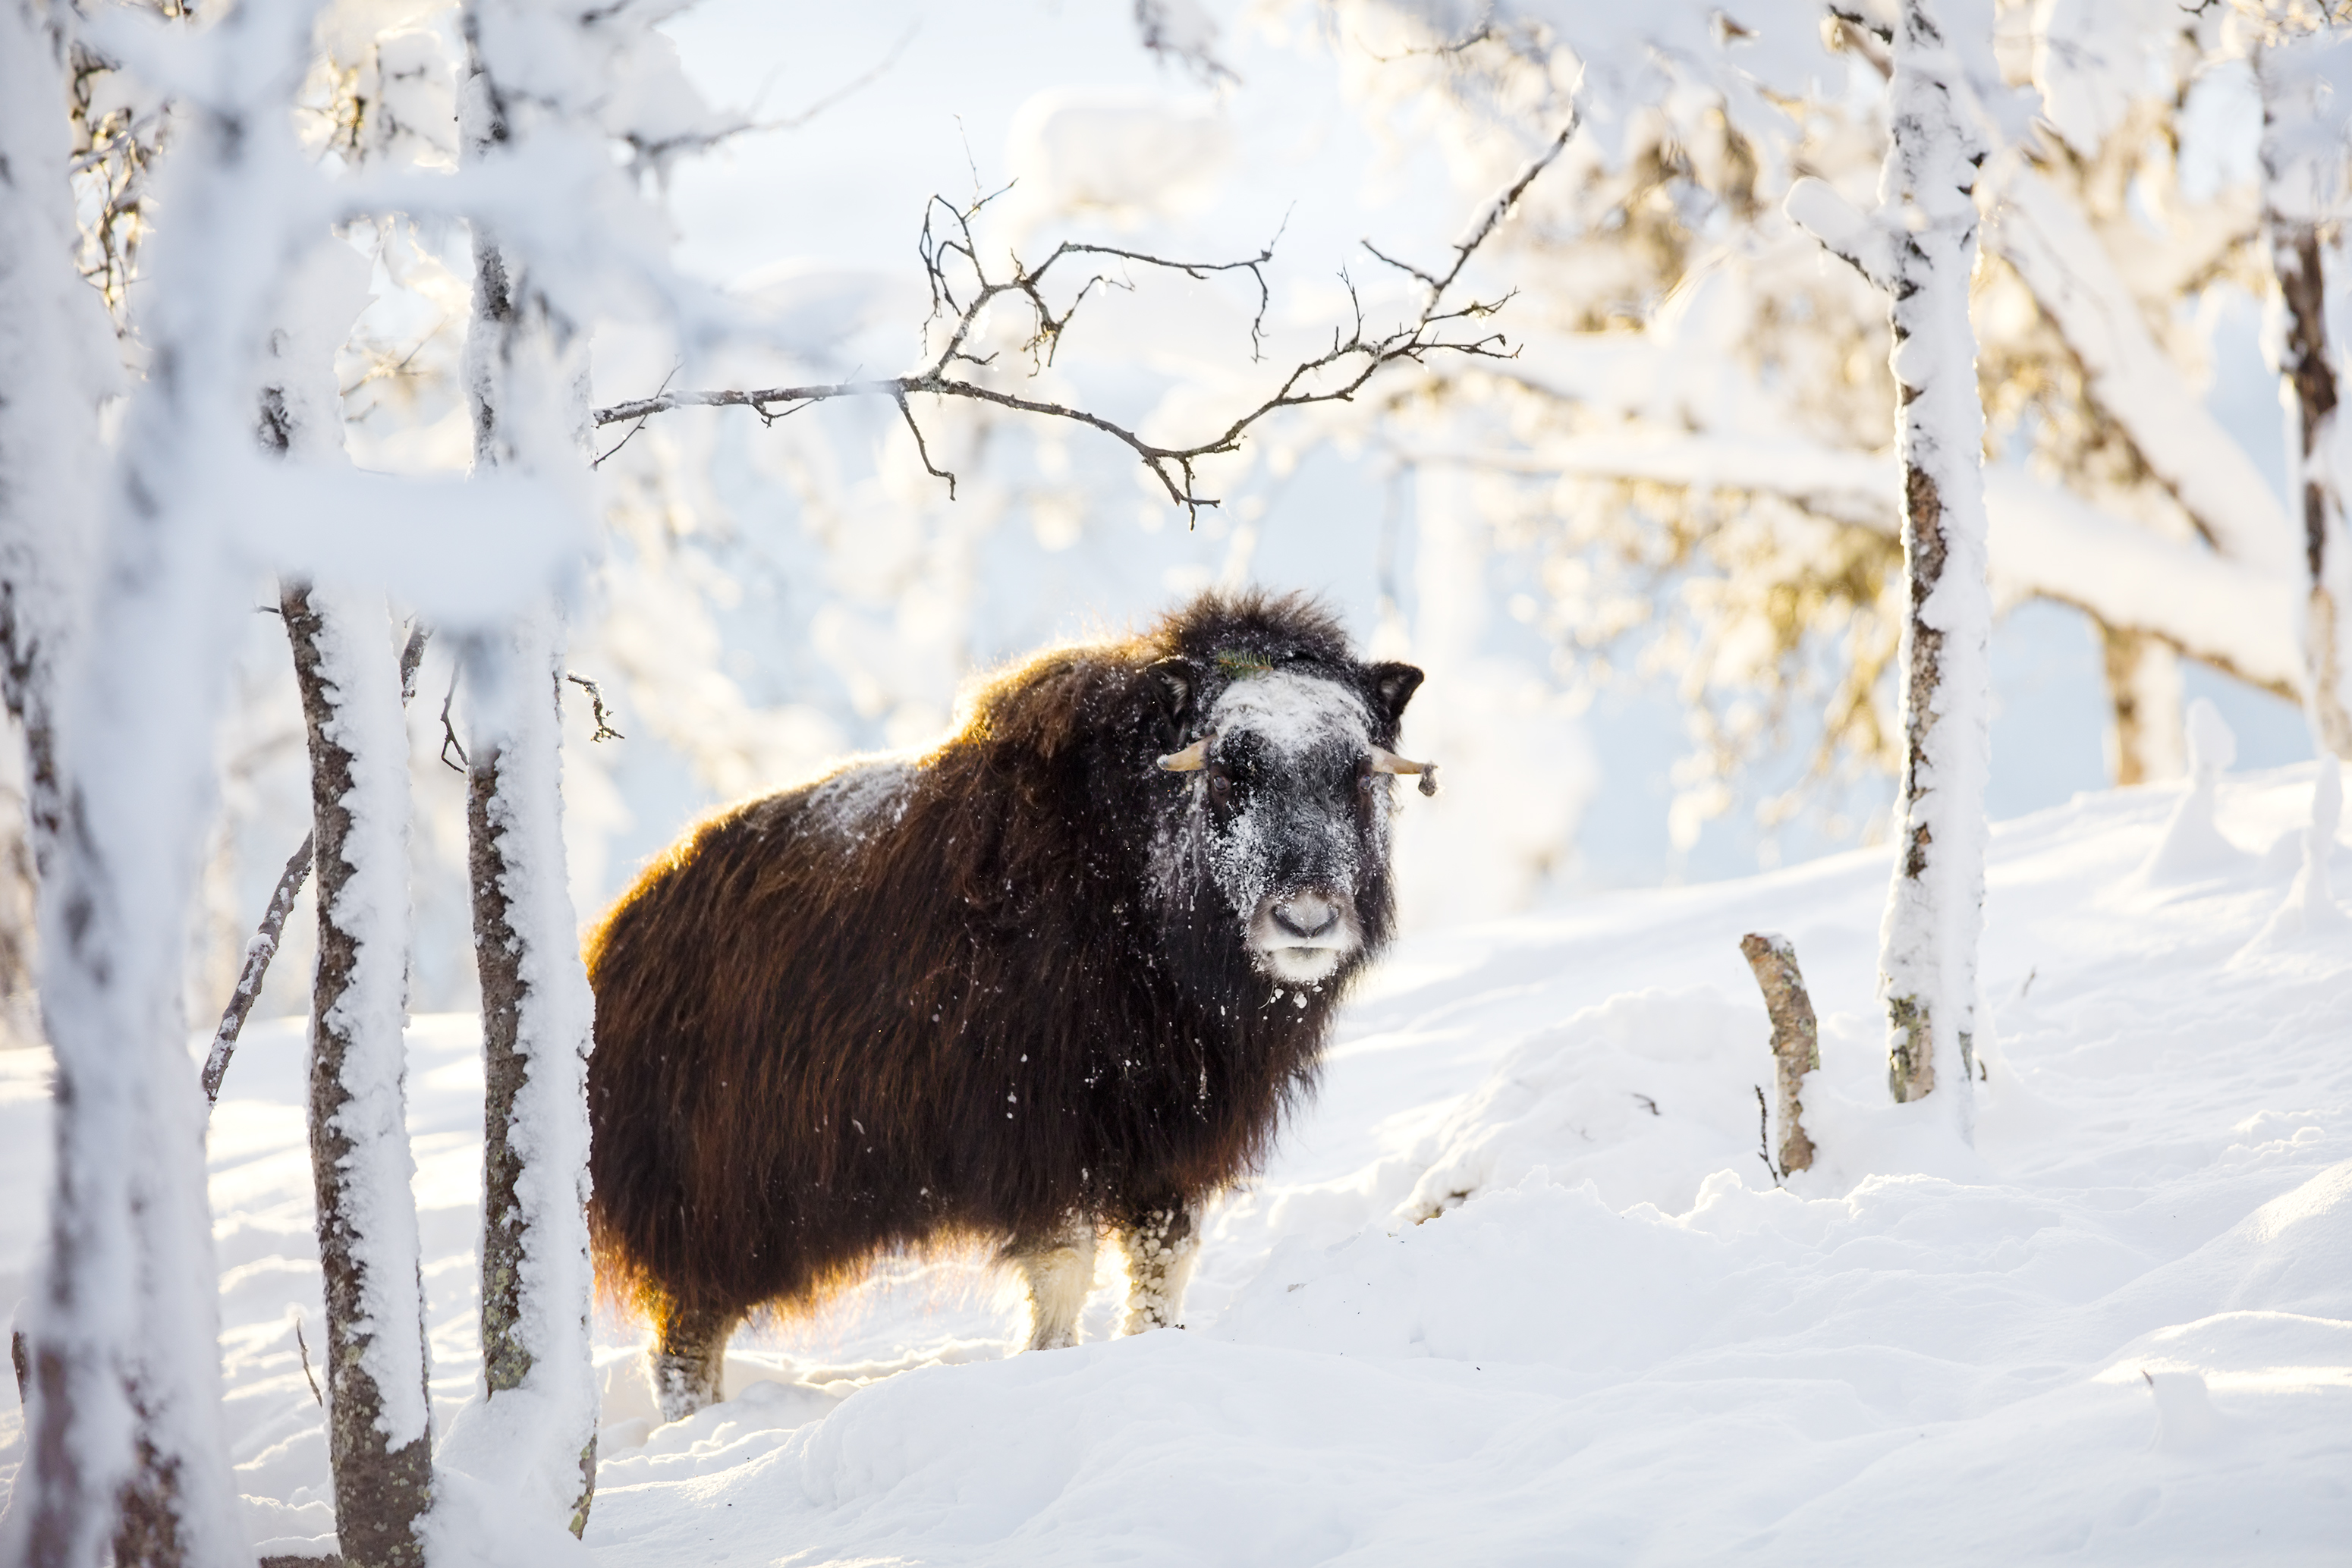 Large muskox standing in the winter snow at sunset. Image Credit: Kjekol, Envato Elements.